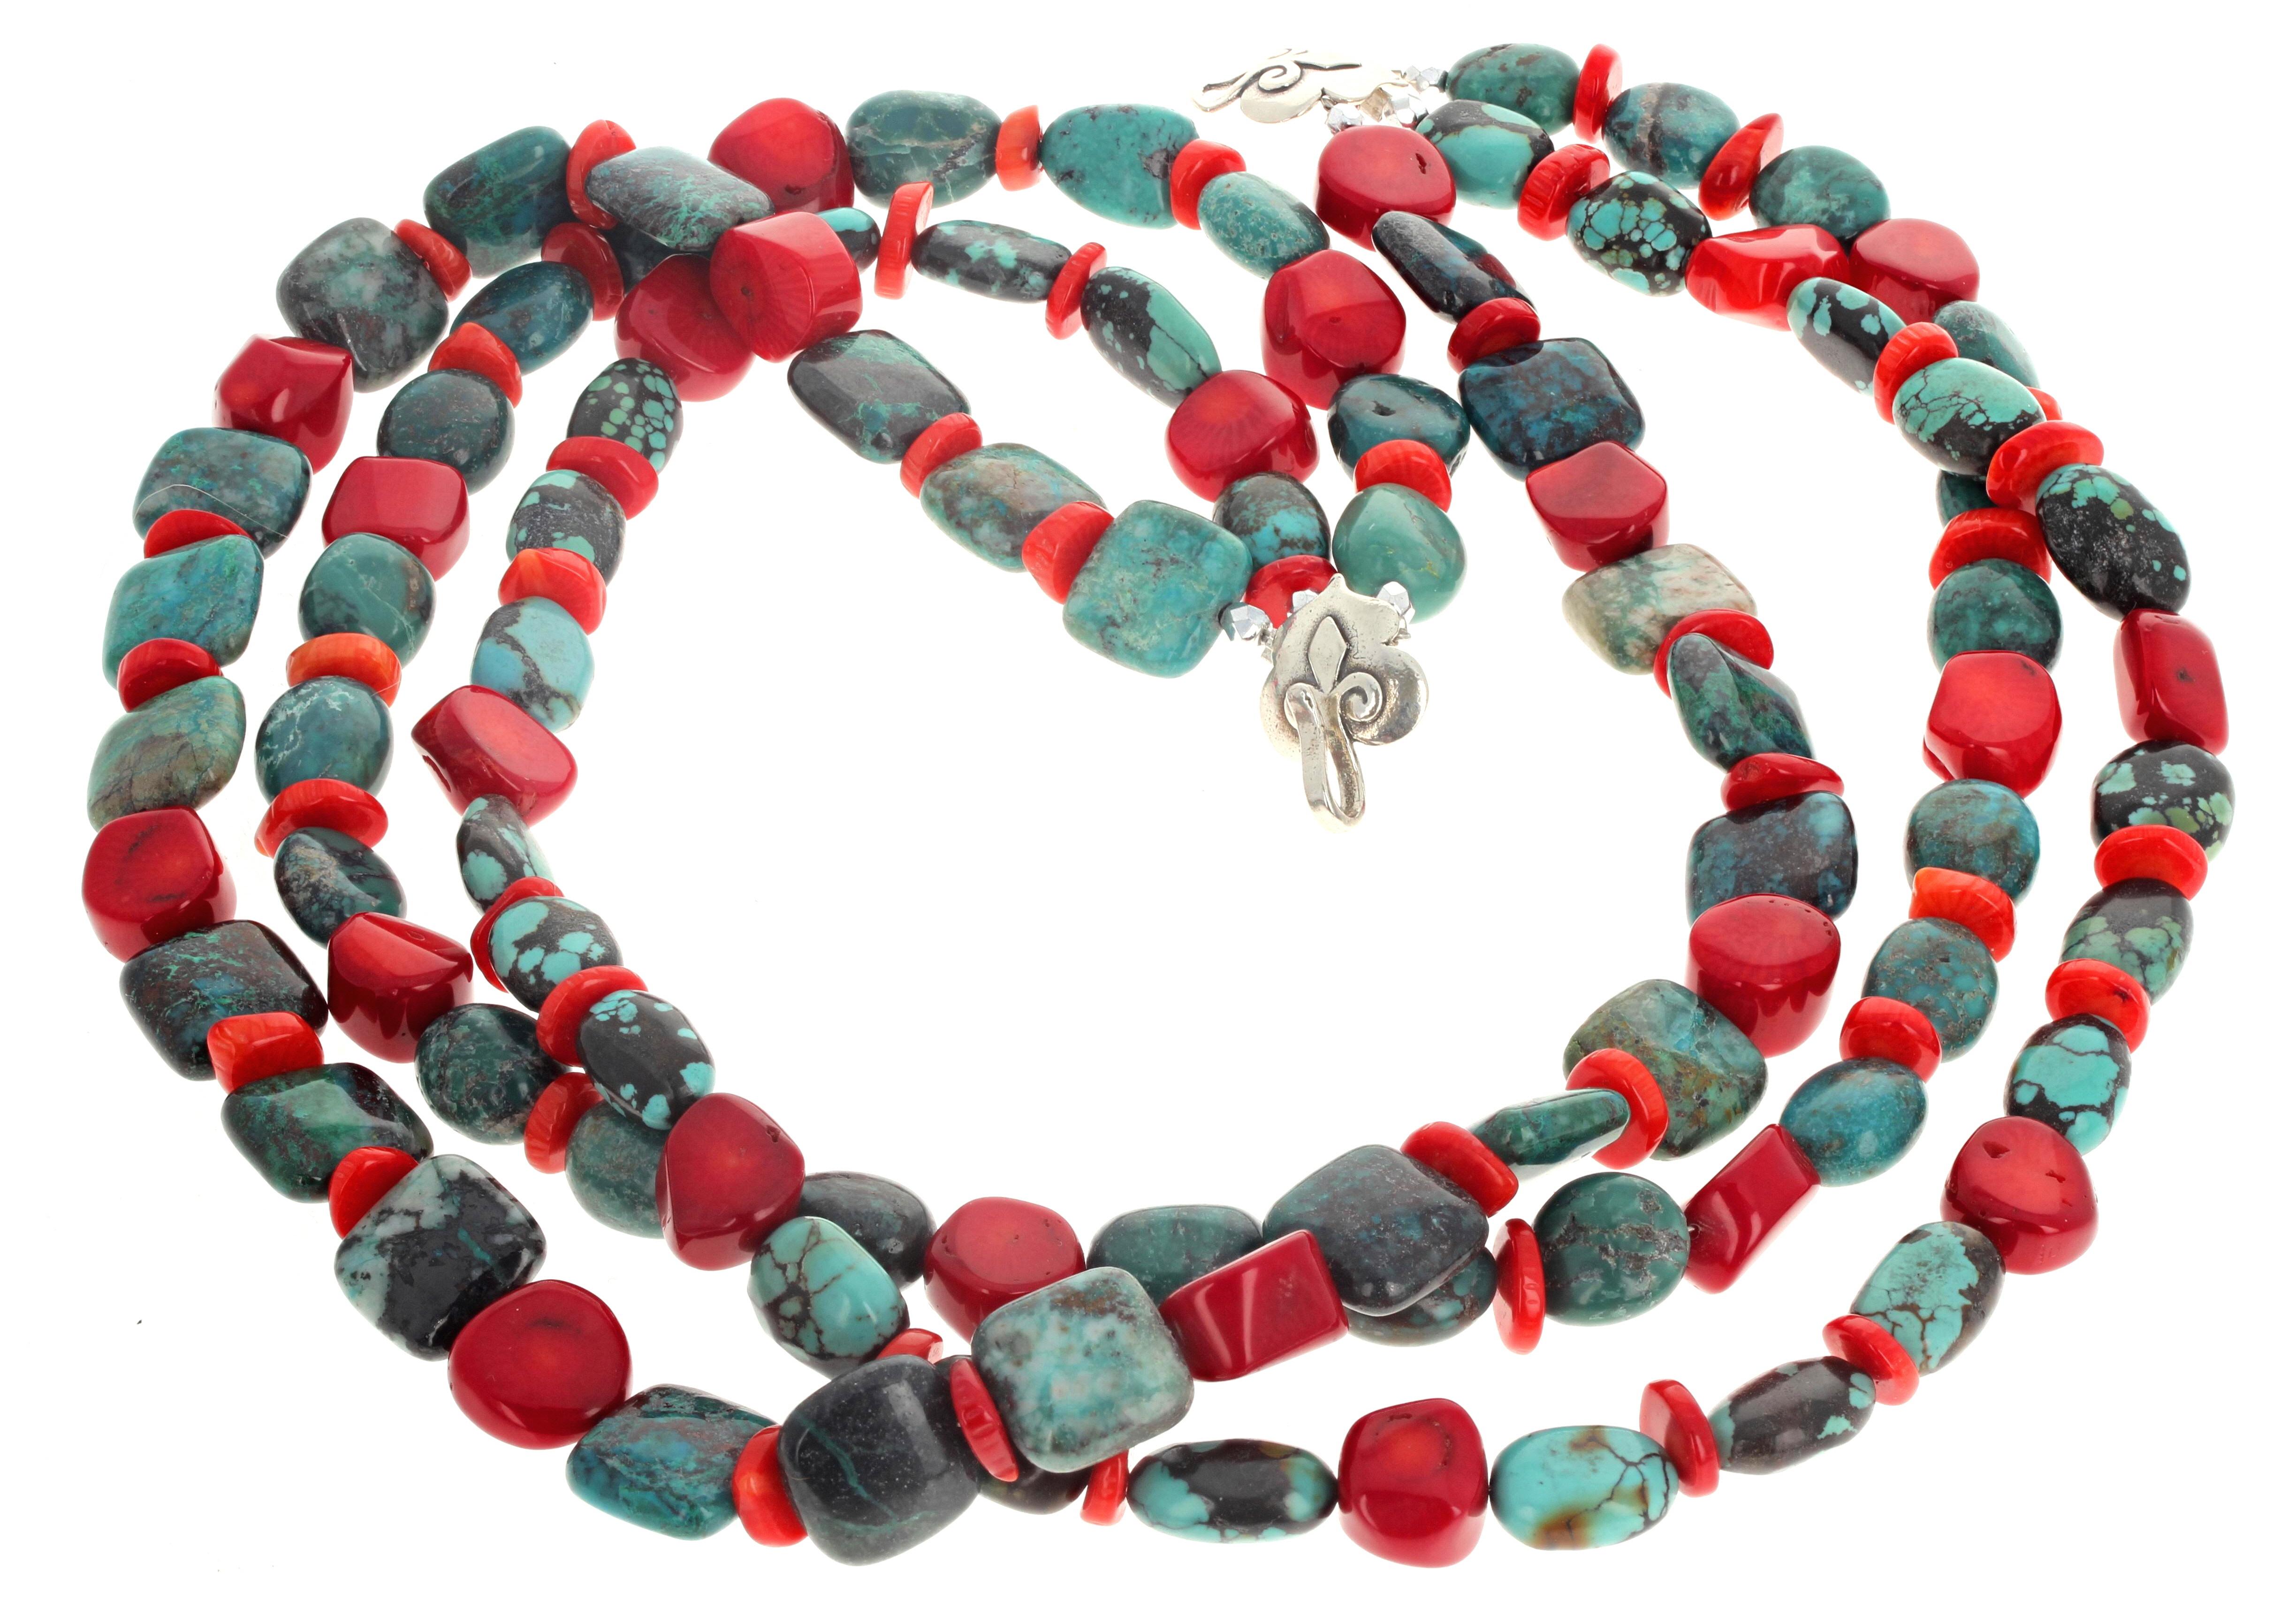 This is a dramatic and superbly elegant 20 inch long triple strand Turquoise and Coral necklace. The Turquoise are approximately 13mm x 13mm.  The larger red Coral are approximately 14mm wide.  The clasp is an elegant sterling silver easy to use